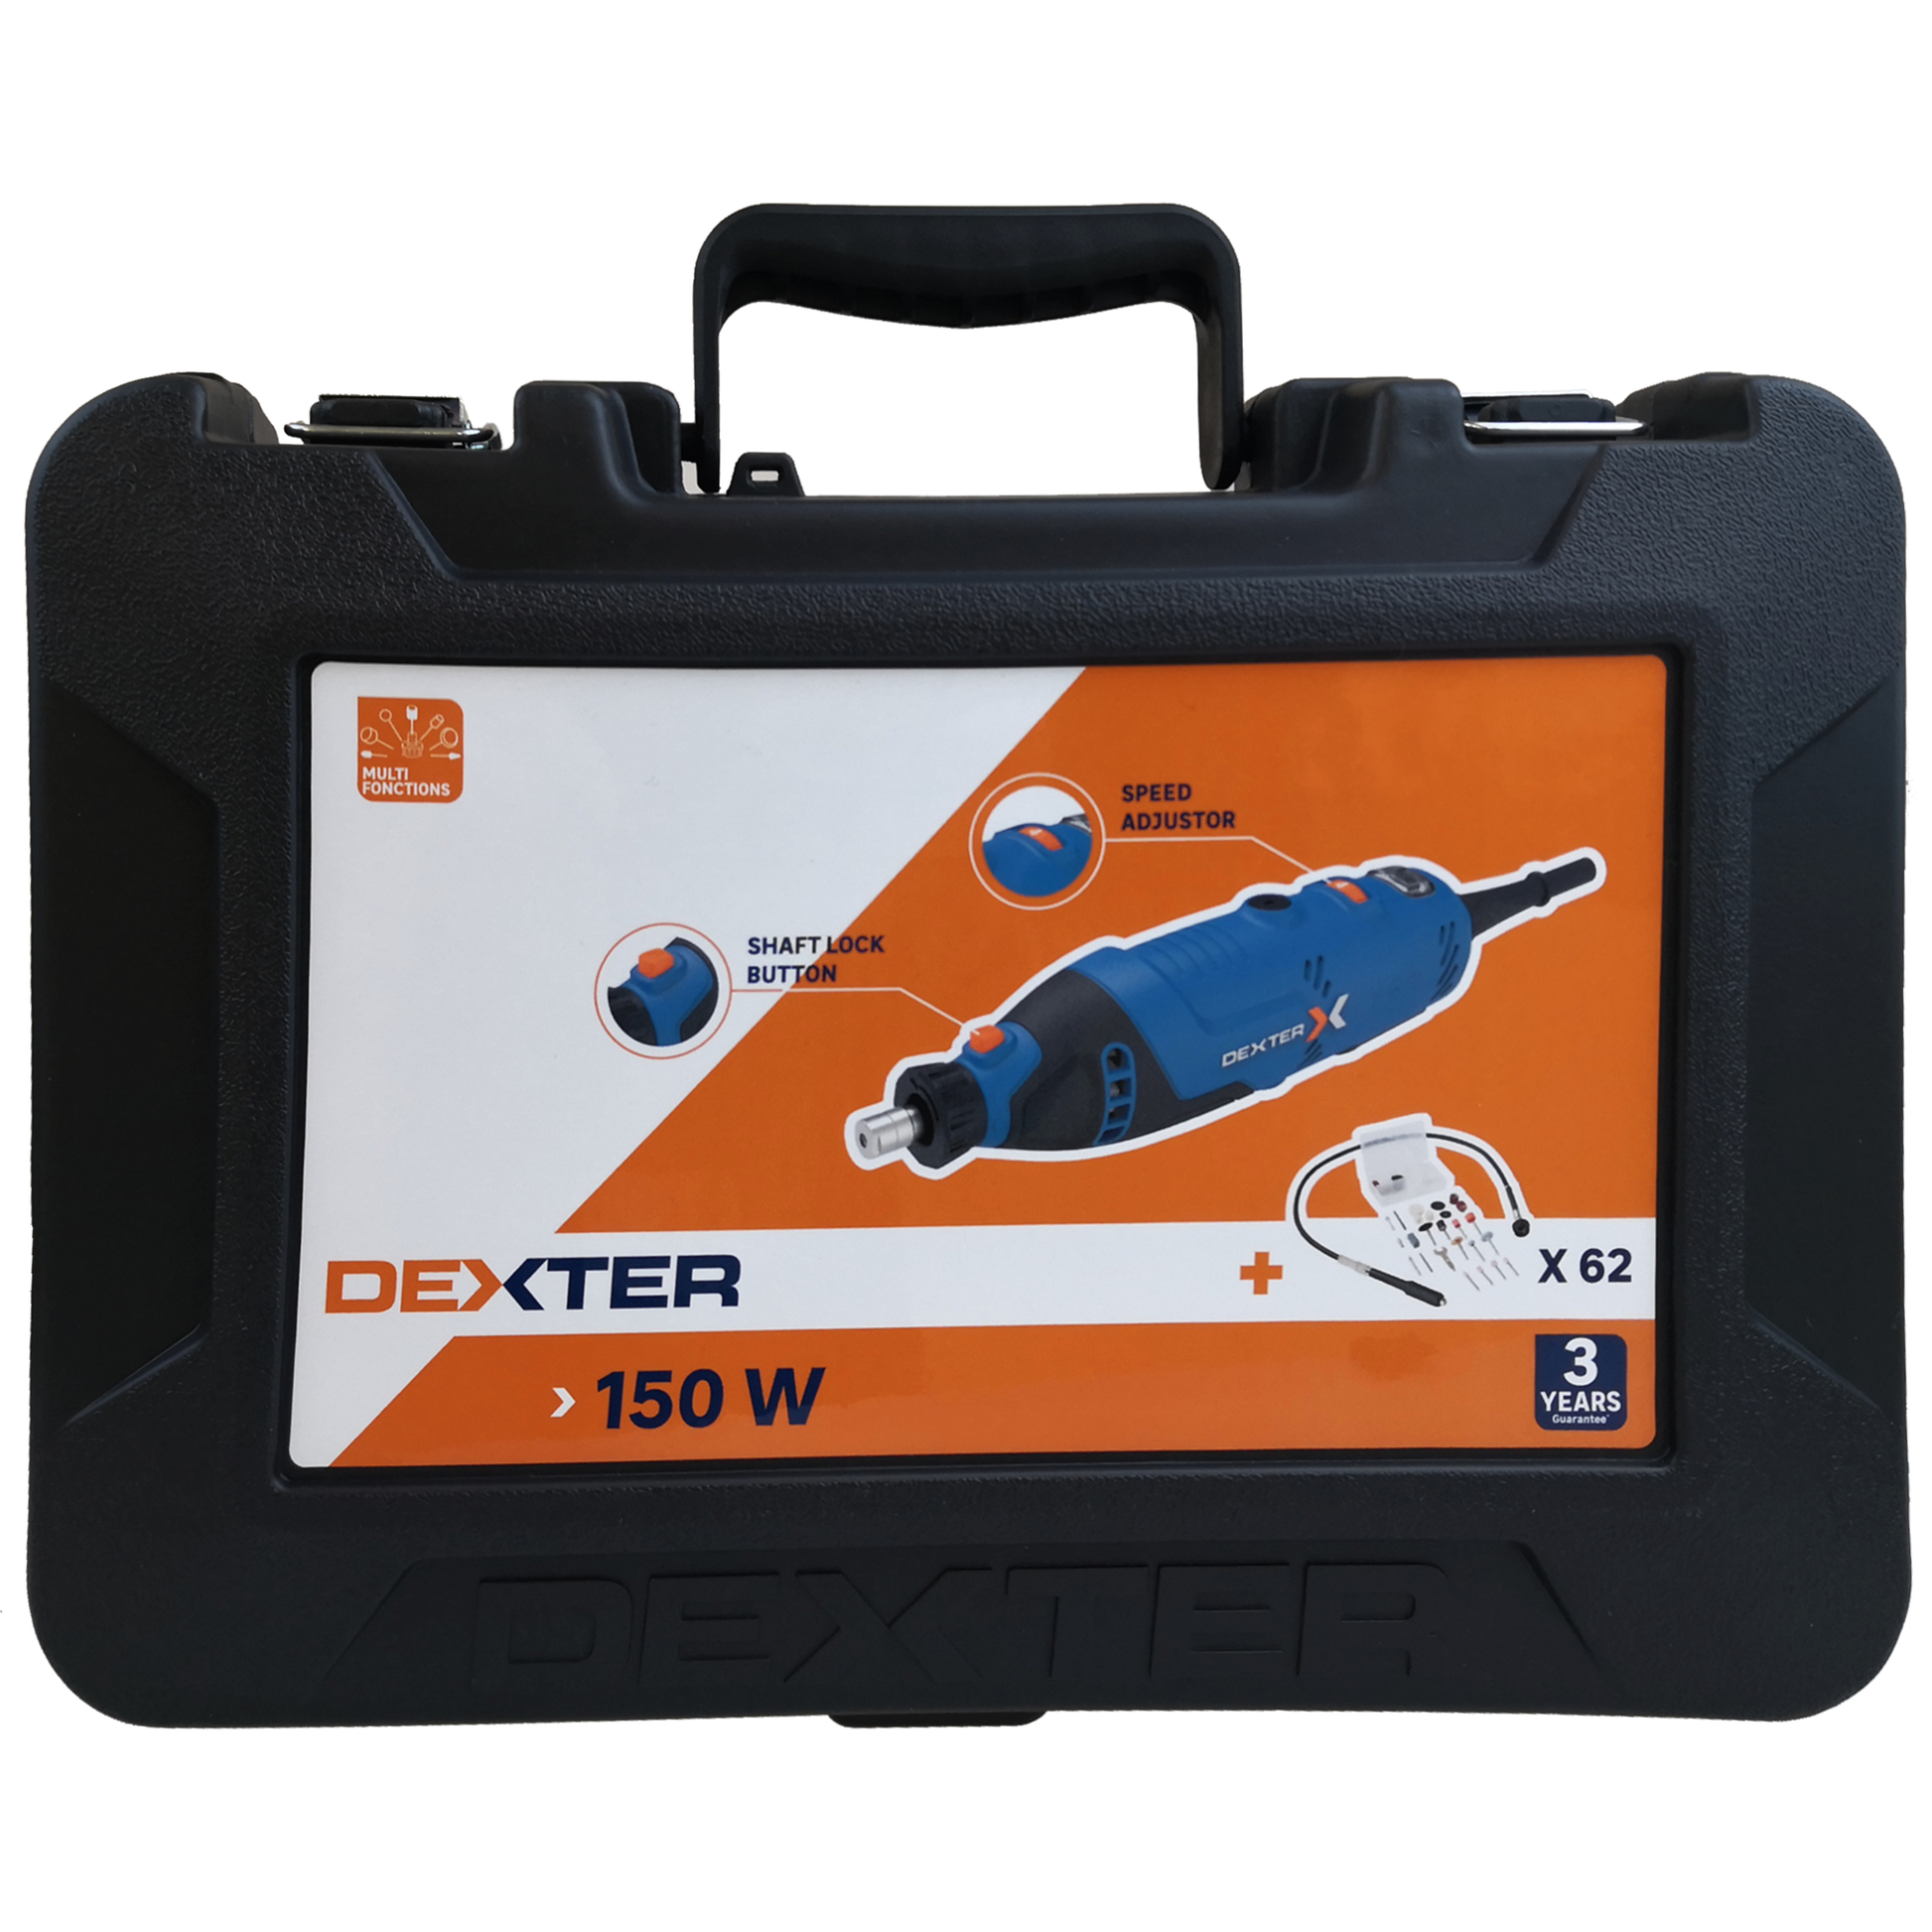 DEXTER 150 W ROTARY MINI-TOOL WITH 62 ACCESSORIES